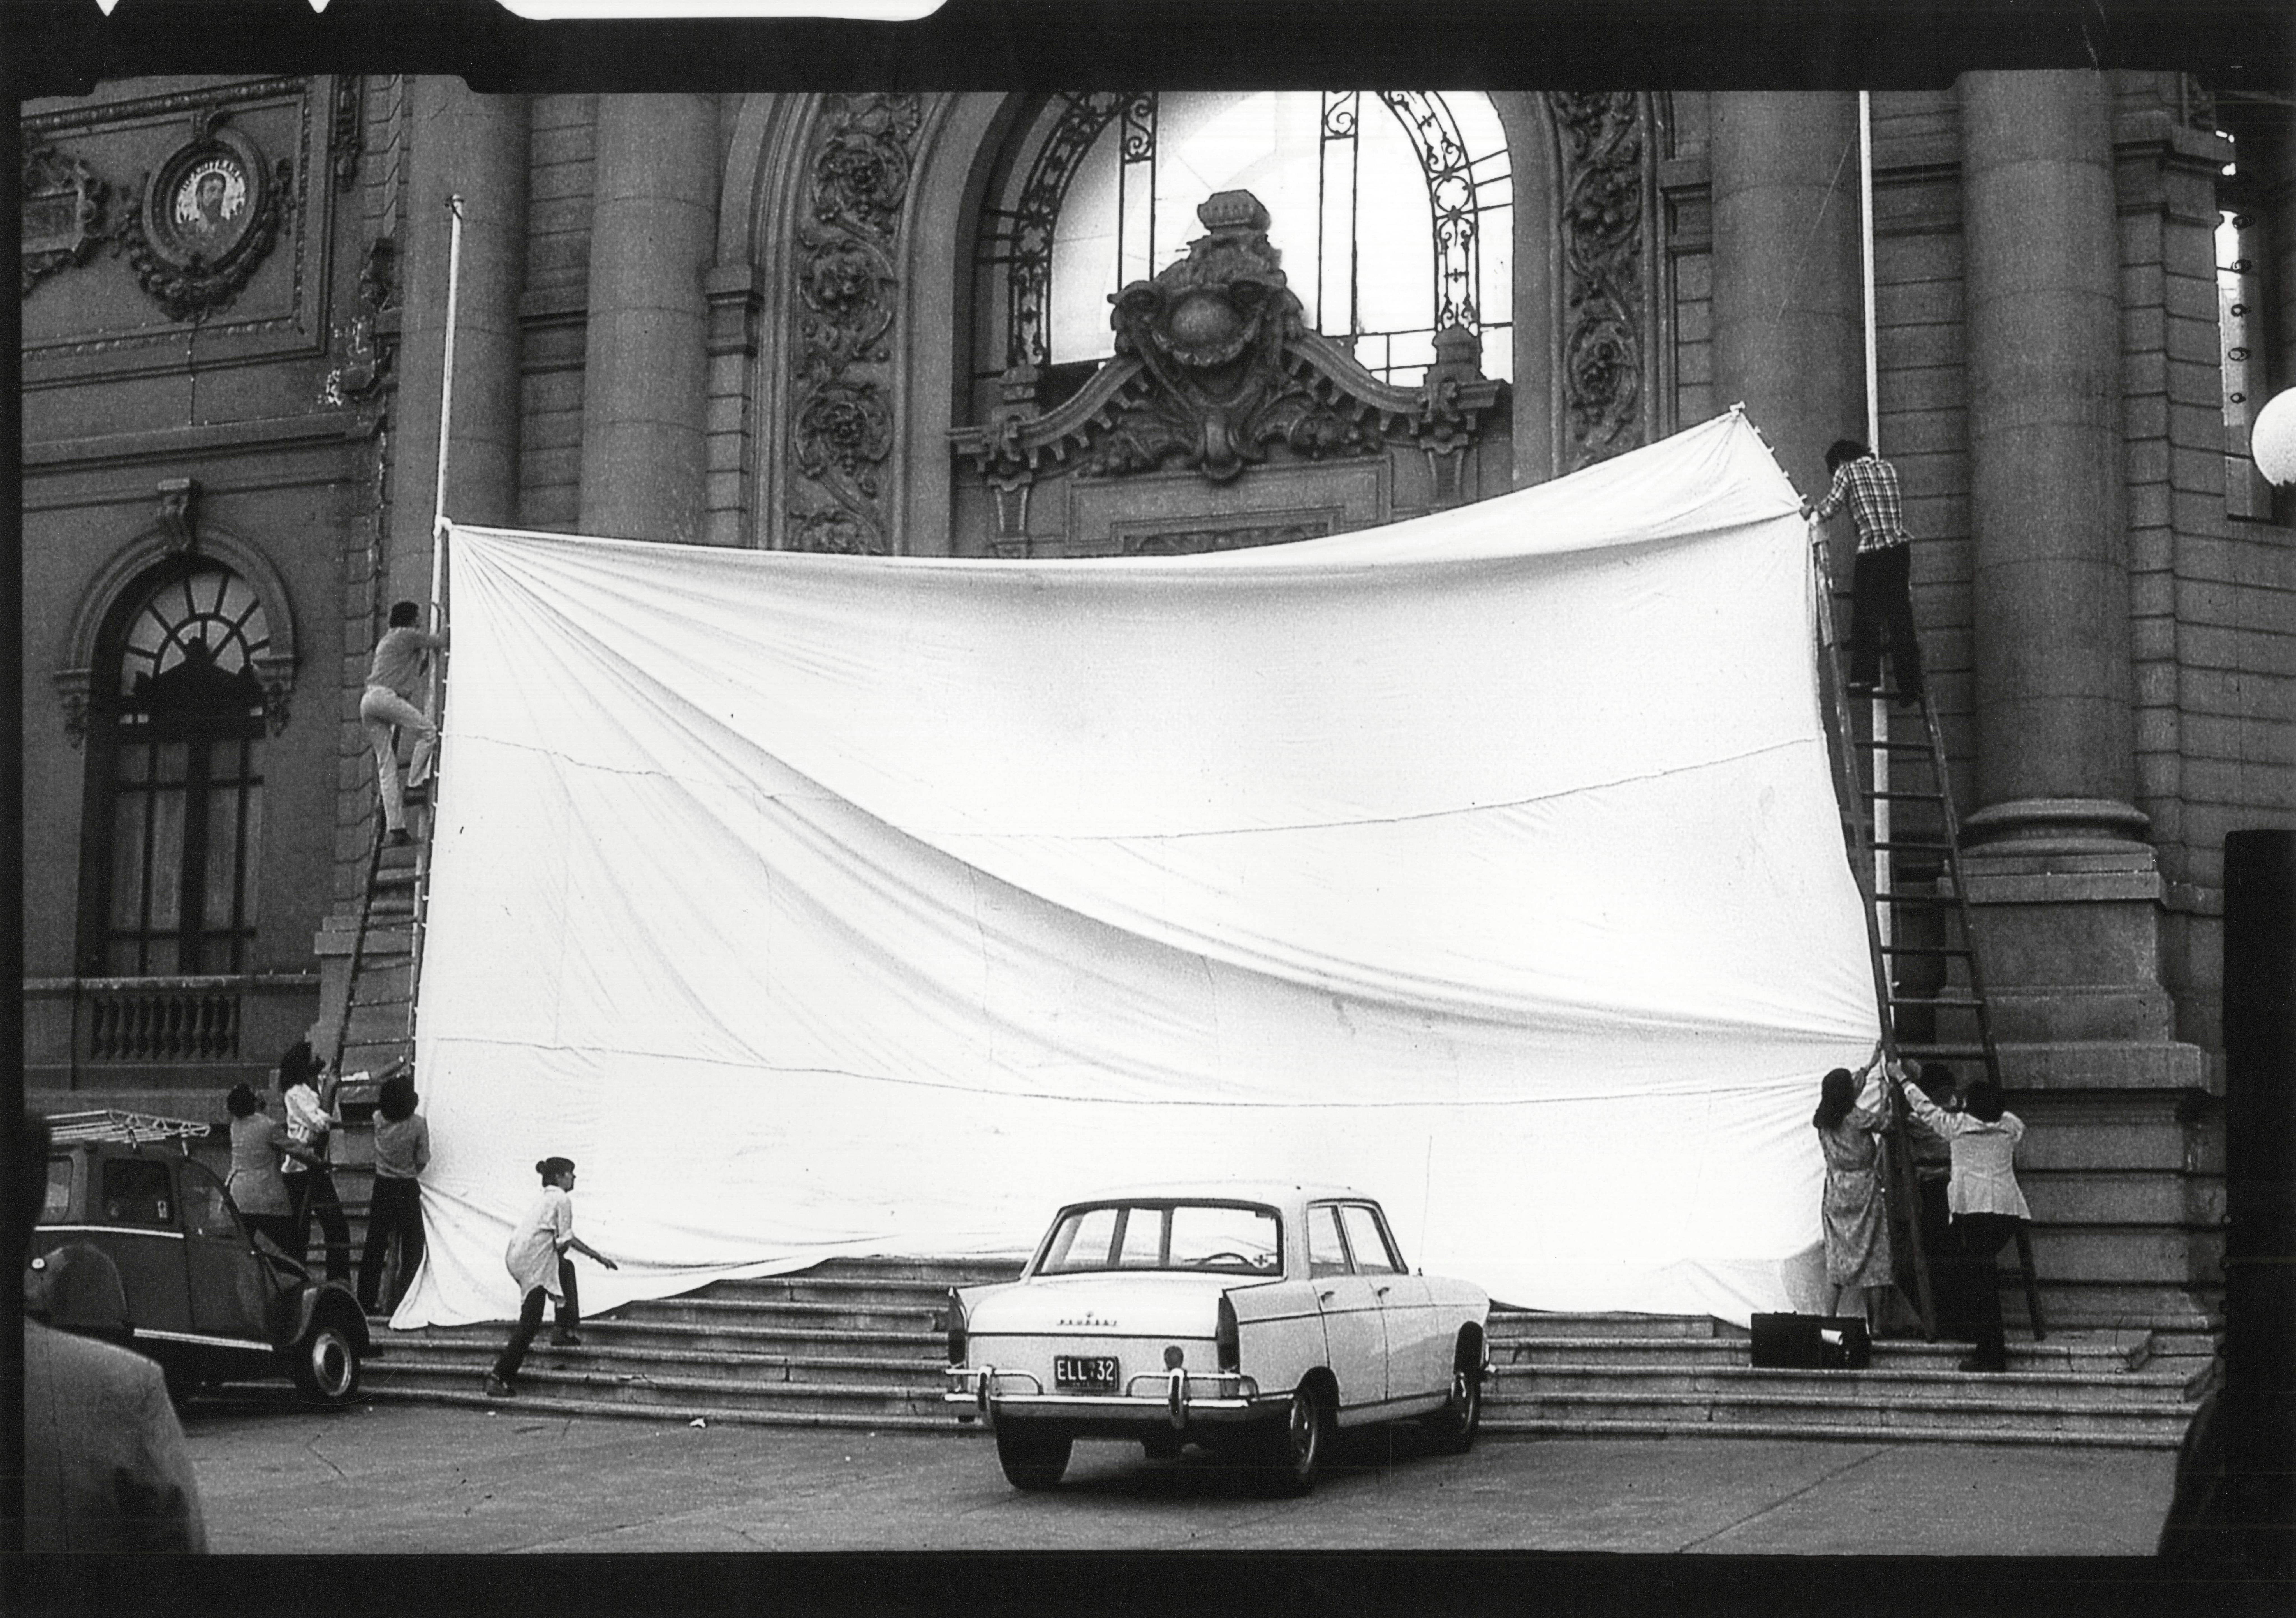 Black and white photograph of a group of people installing a large white sheet in front of the entrance to the Museo de Bellas Artes.